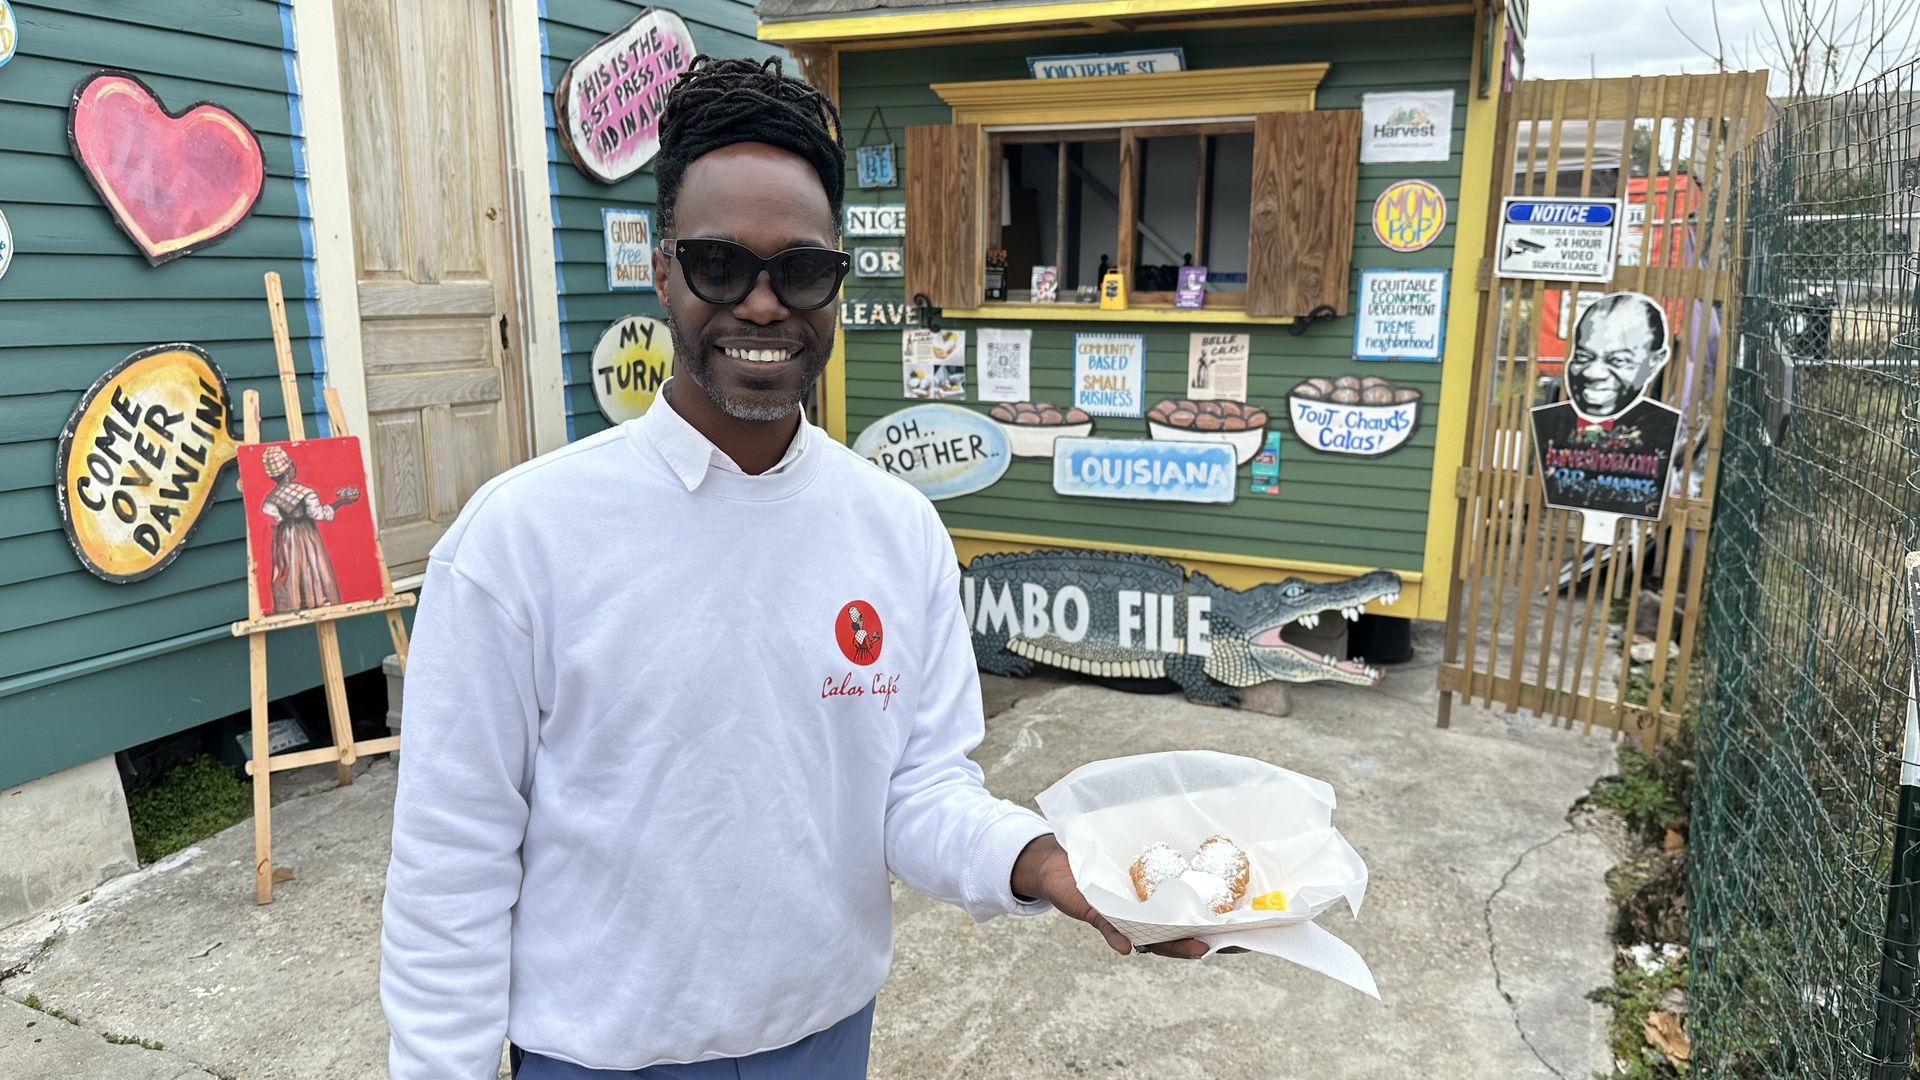 Brandan Pellerin holds up a paper tray of calas, smiling as he stands in front of The Calas Cafe. The food cart has brightly colored signs advertising the food and its history.